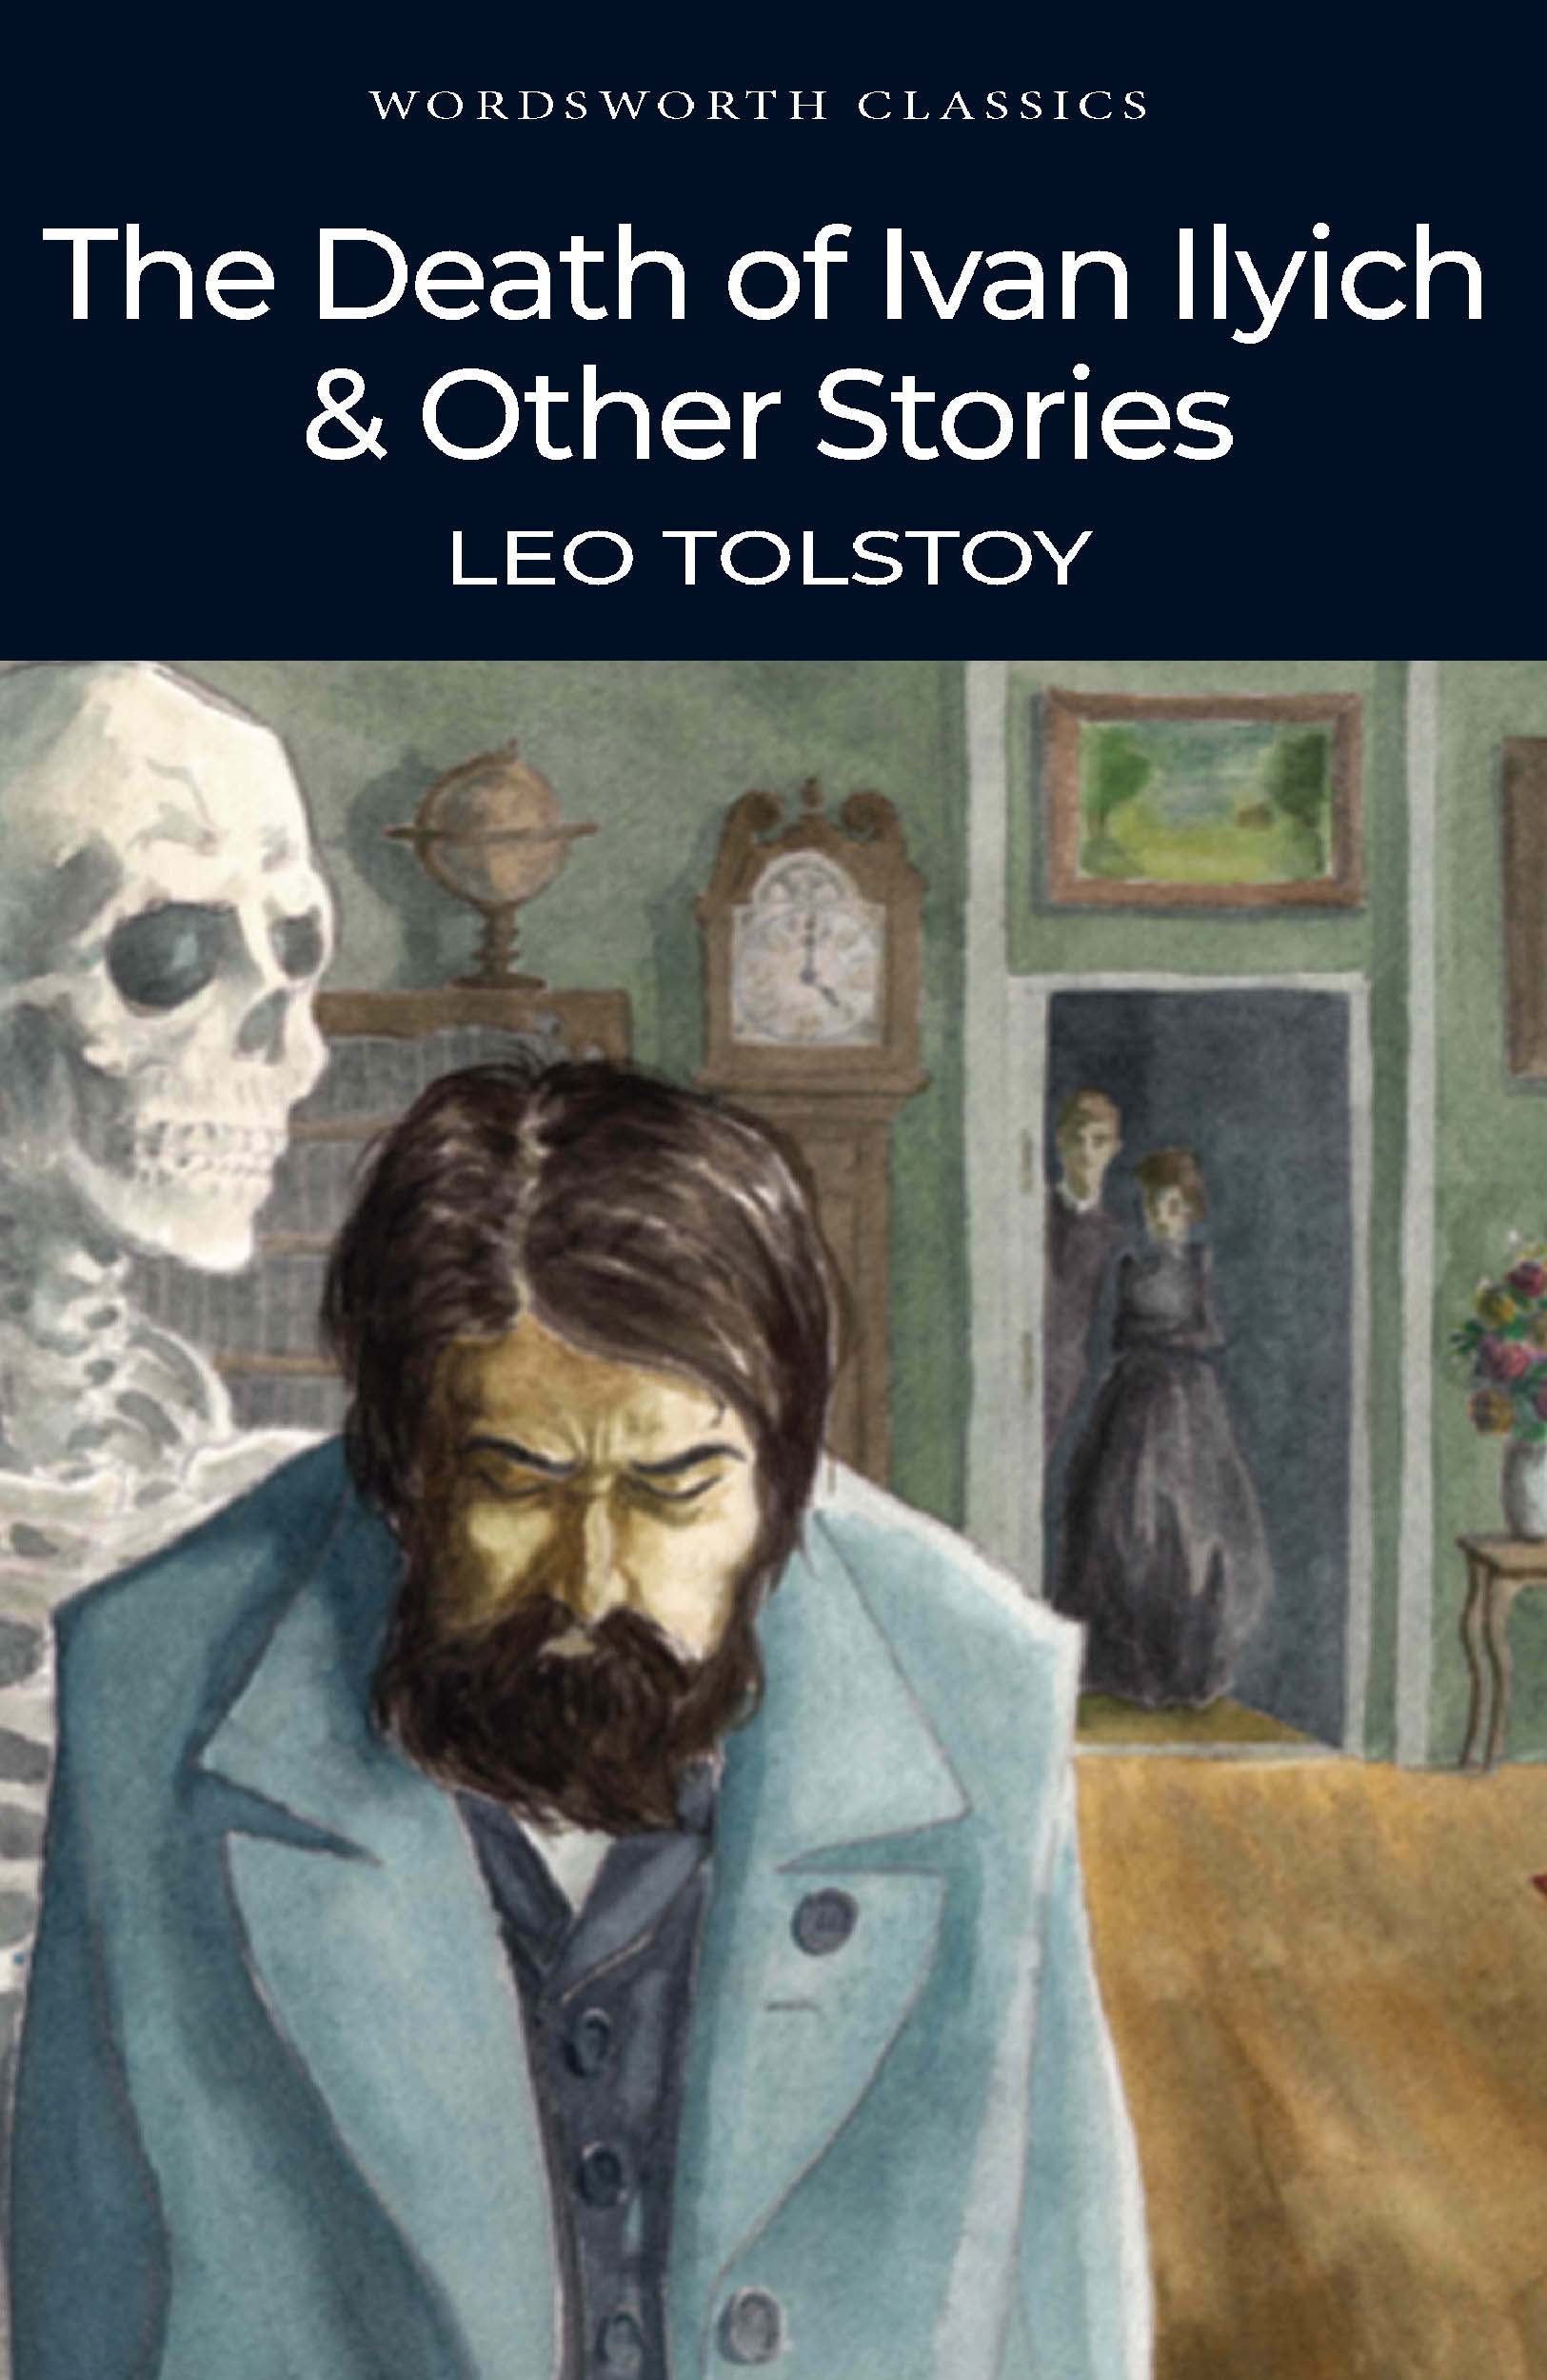 The Death of Ivan Ilyich and  Other Stories, by Leo Tolstoy